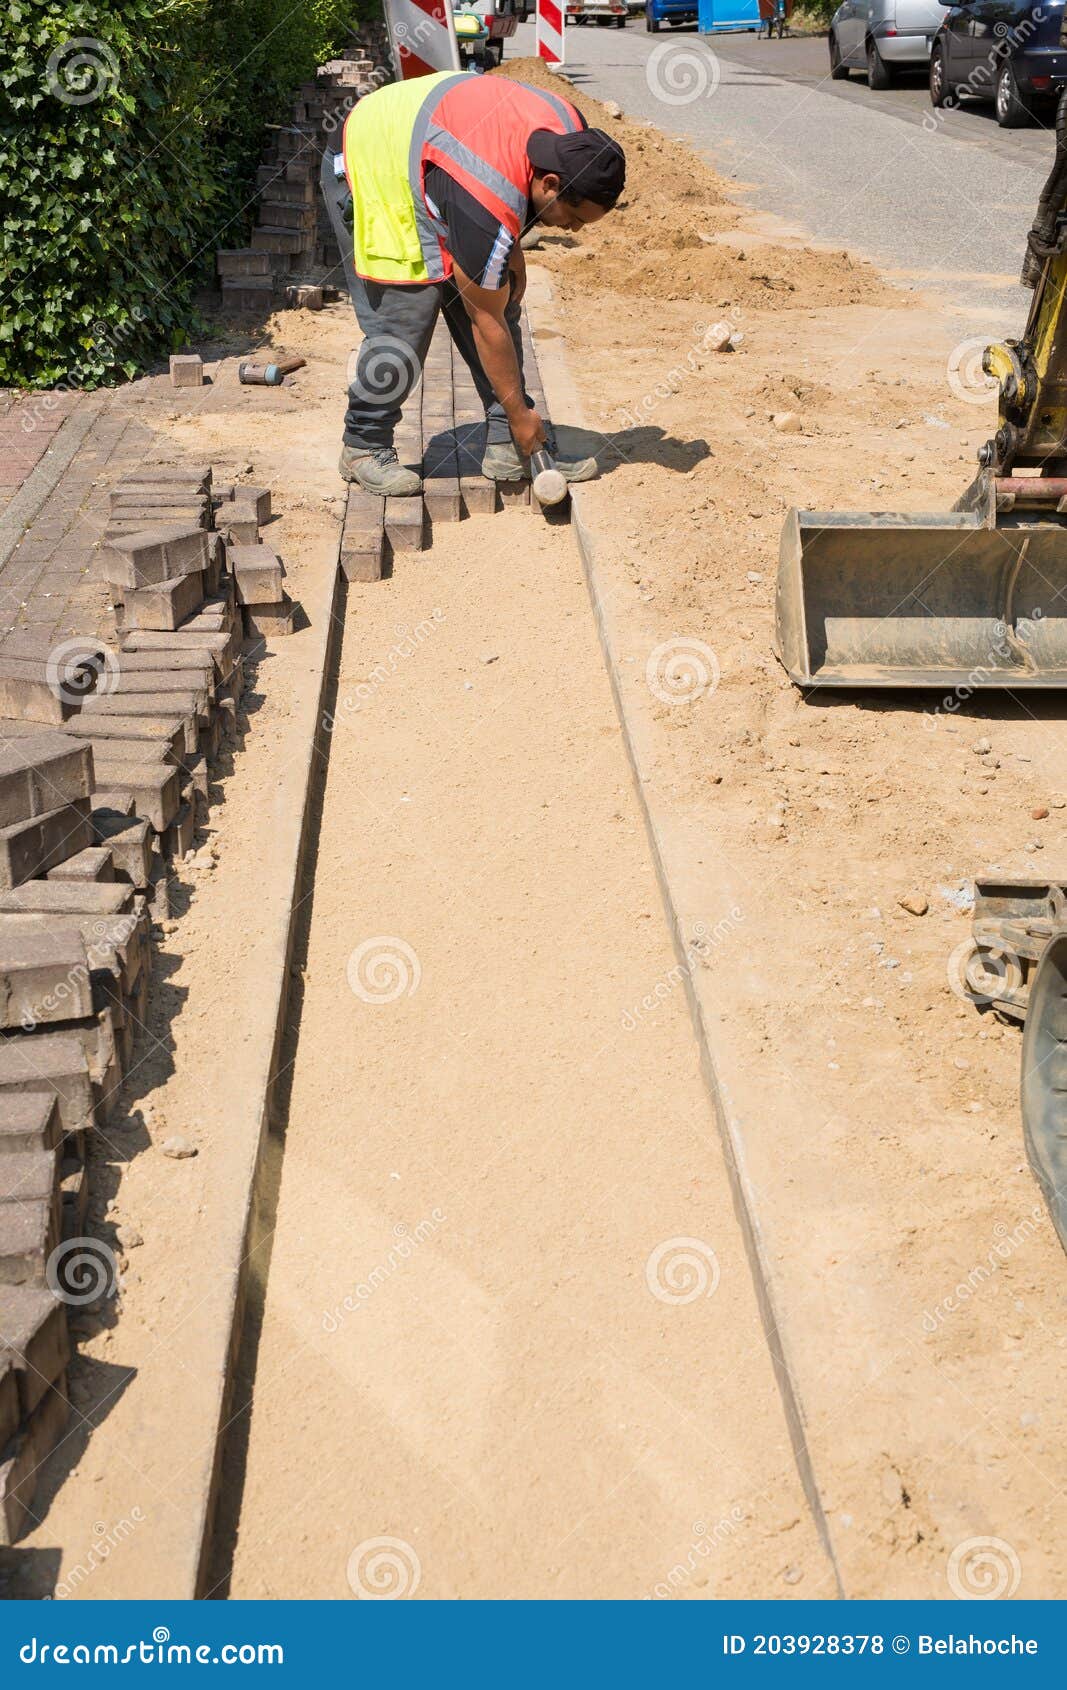 professional paver worker placing pave stones and using a hammer.